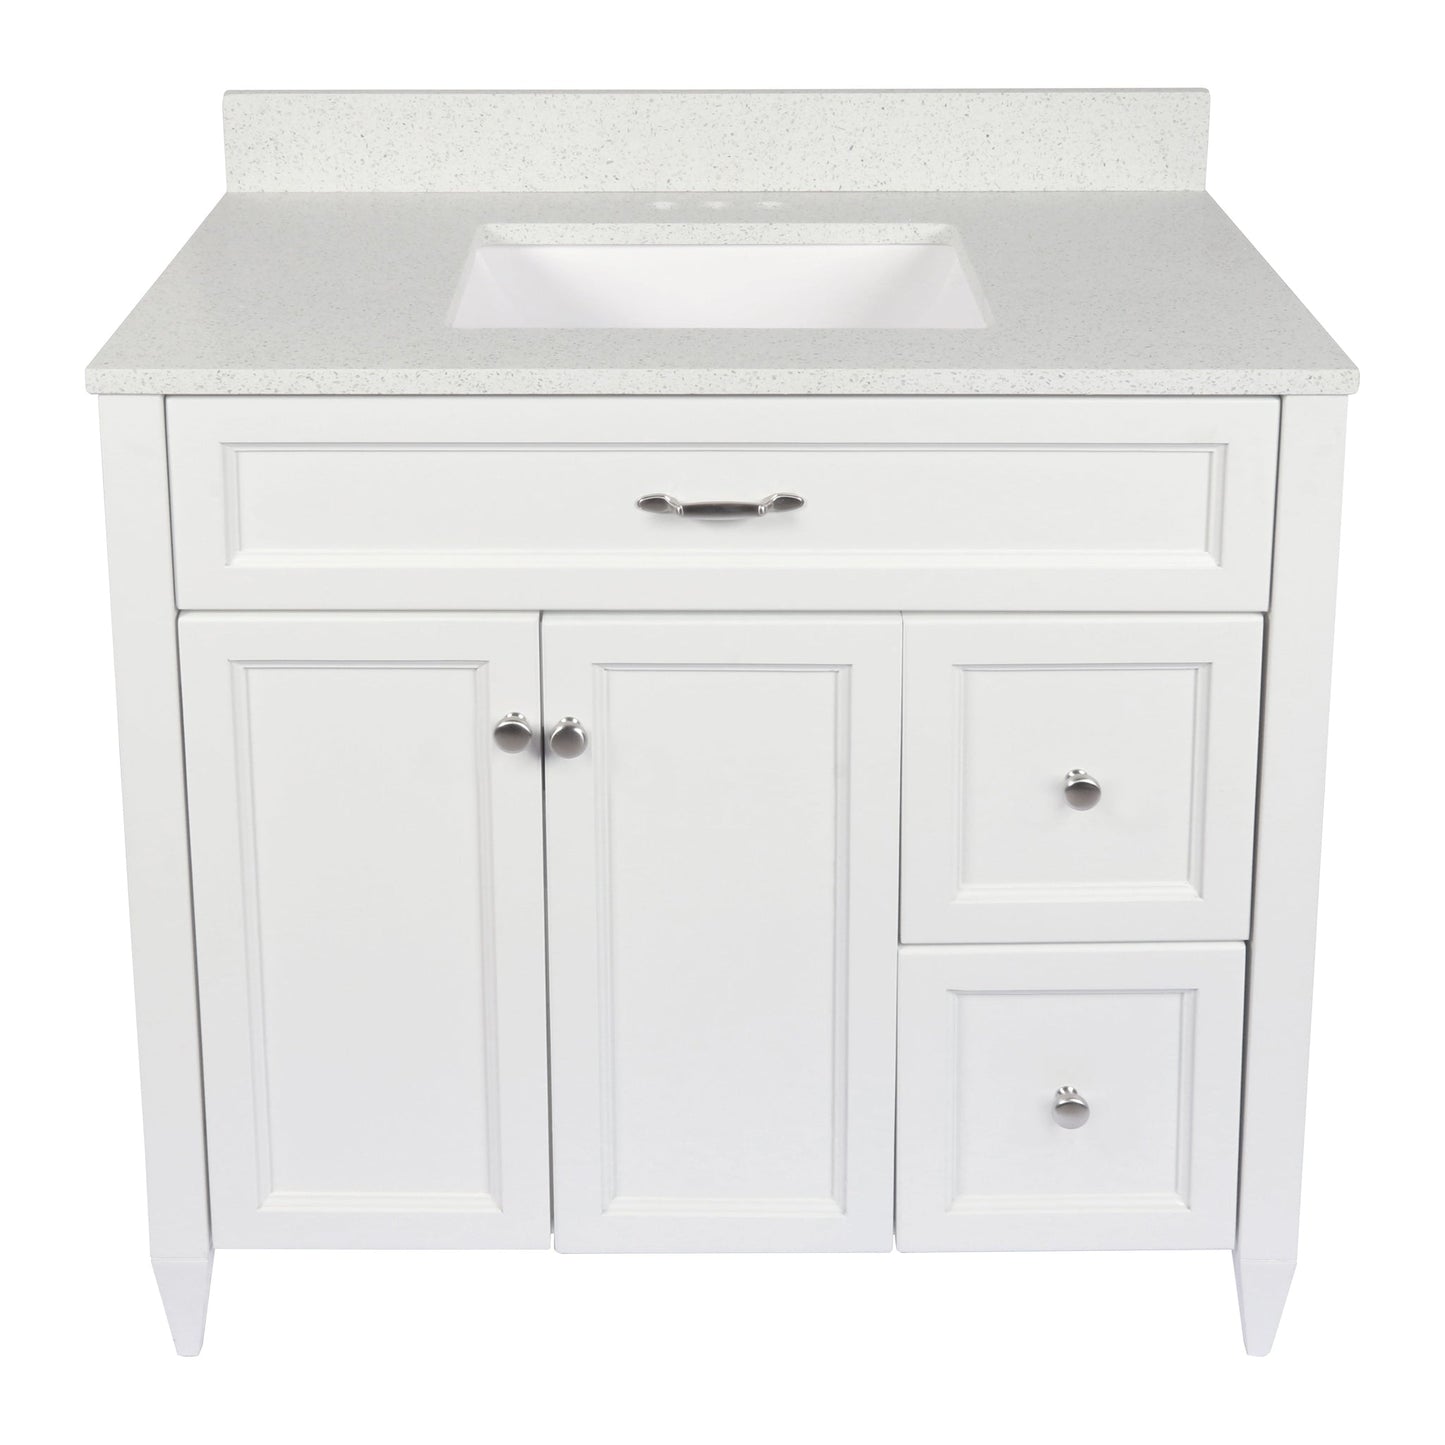 Ella’s Bubbles Vail 37" White Bathroom Vanity With Galaxy White Quartz Stone Top With Backsplash and Sink